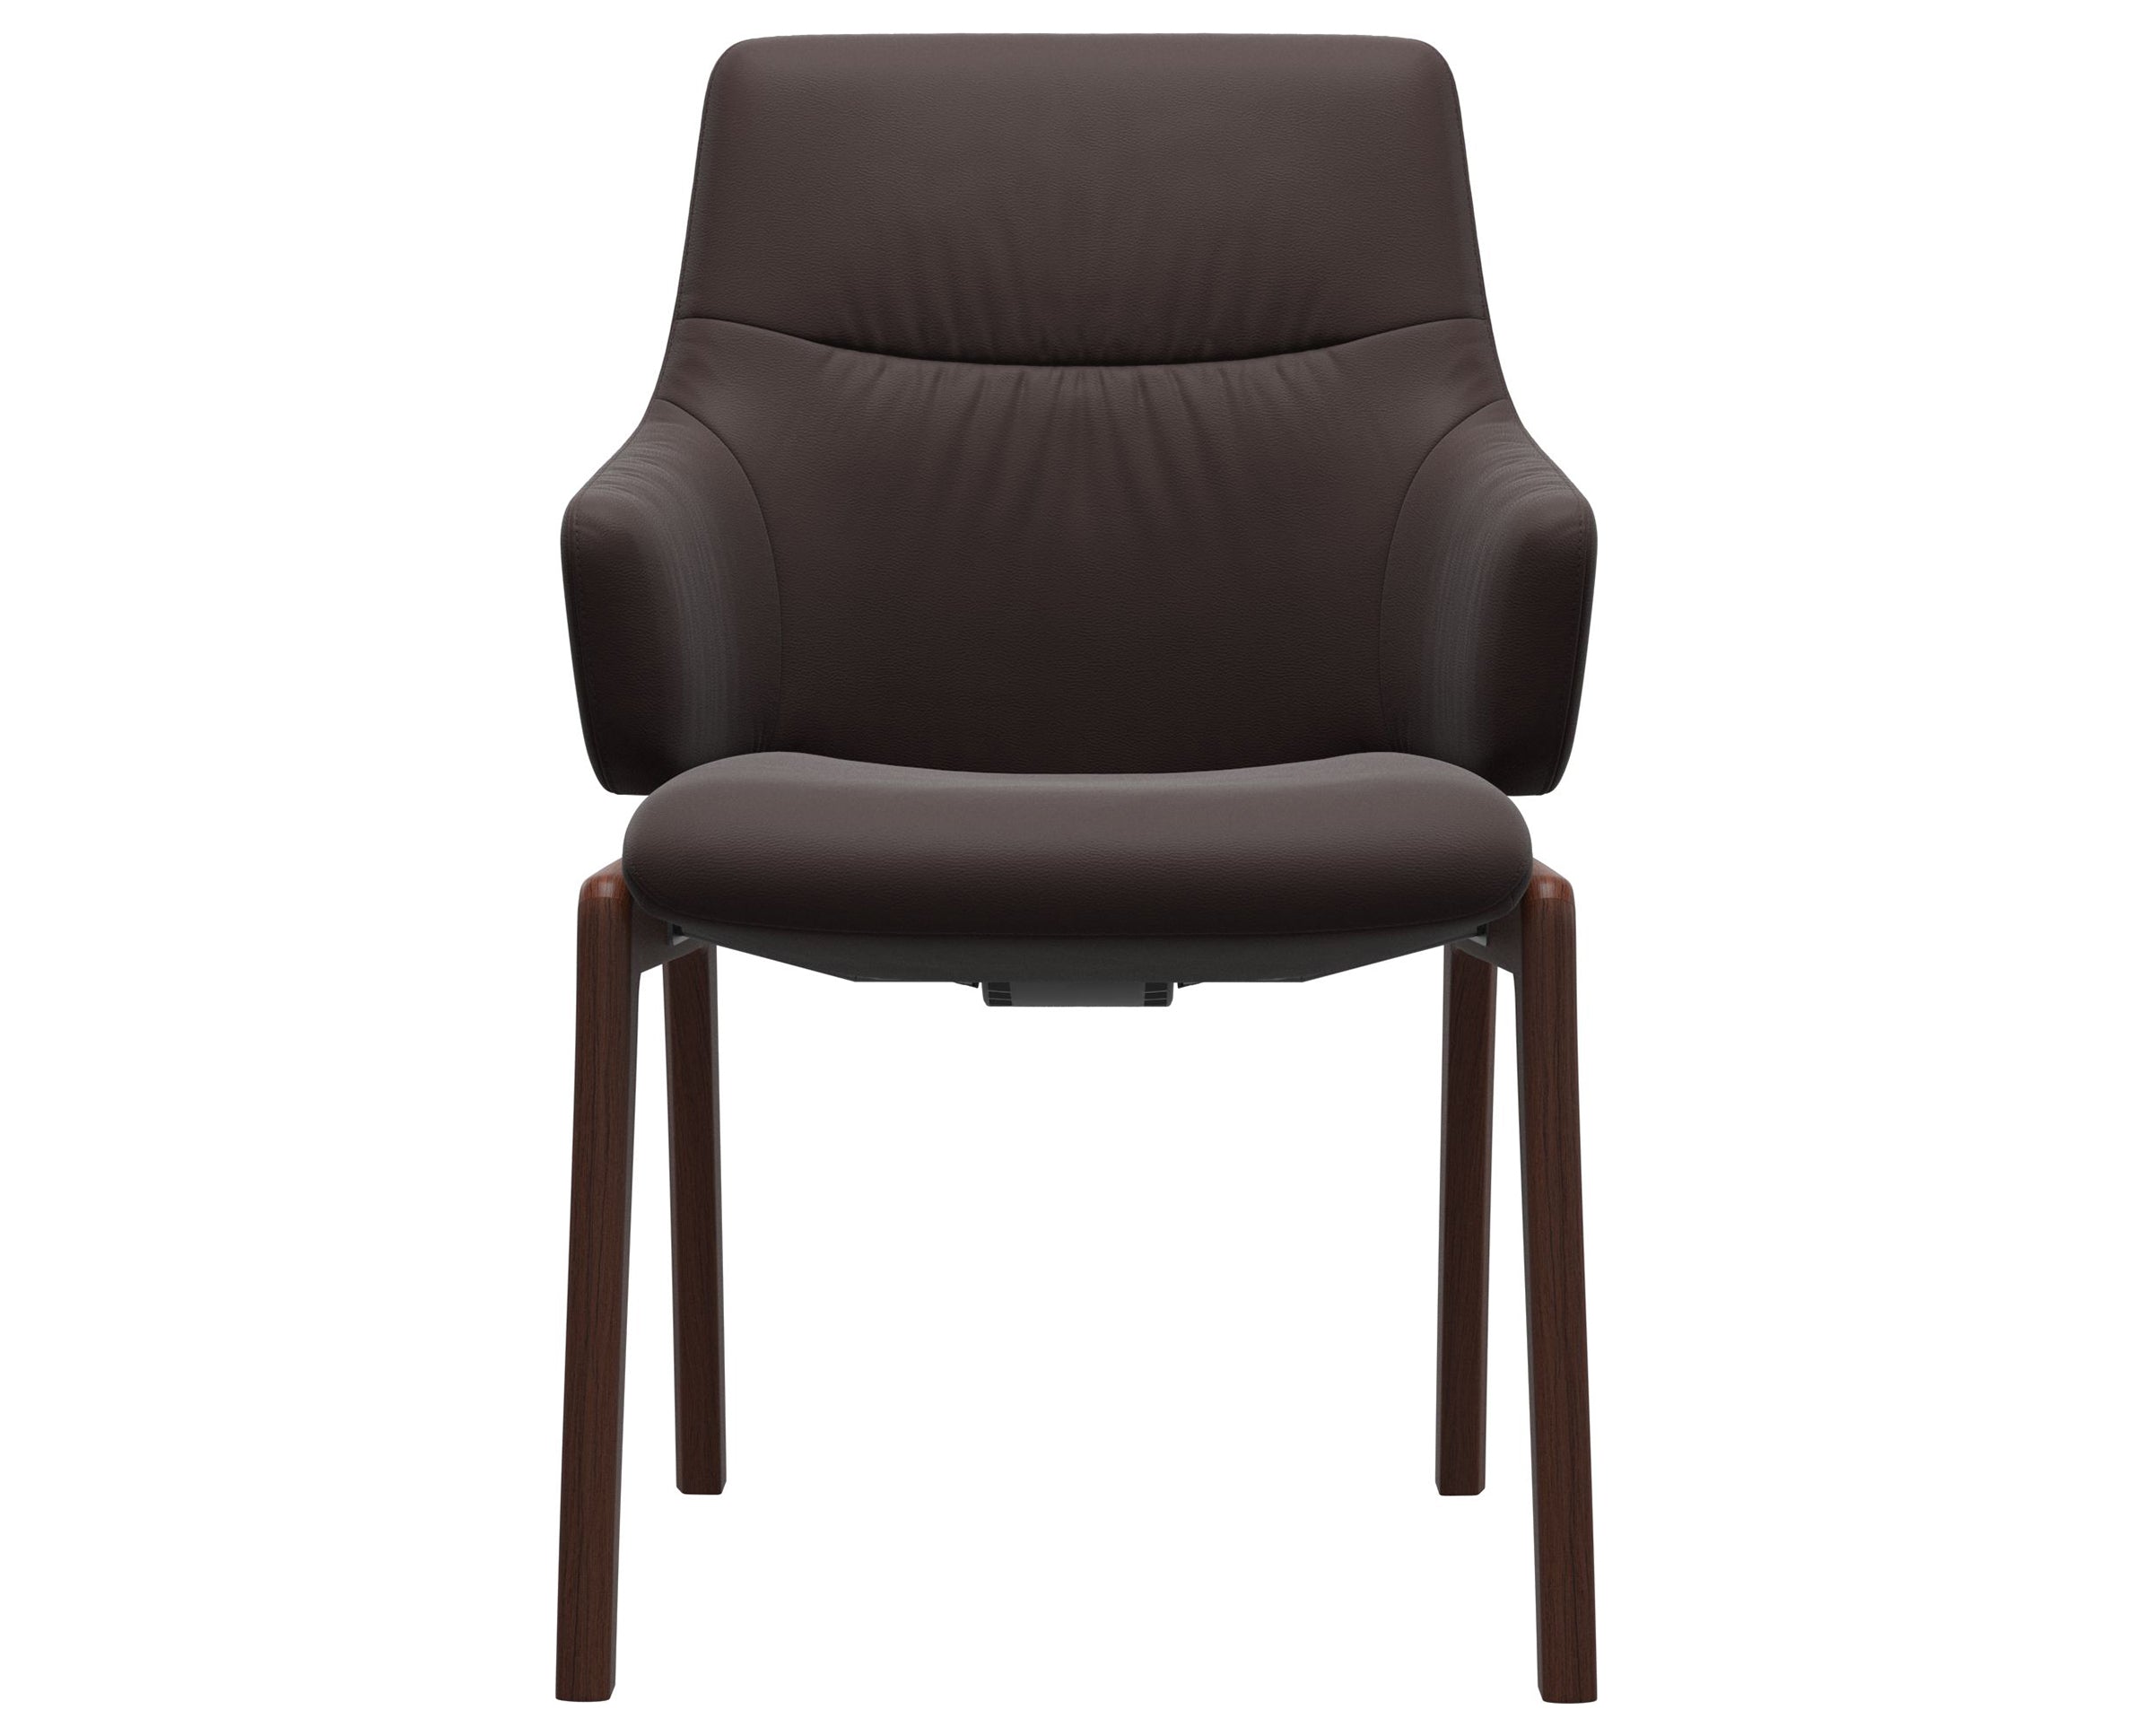 Paloma Leather Chocolate and Walnut Base | Stressless Mint Low Back D100 Dining Chair w/Arms | Valley Ridge Furniture